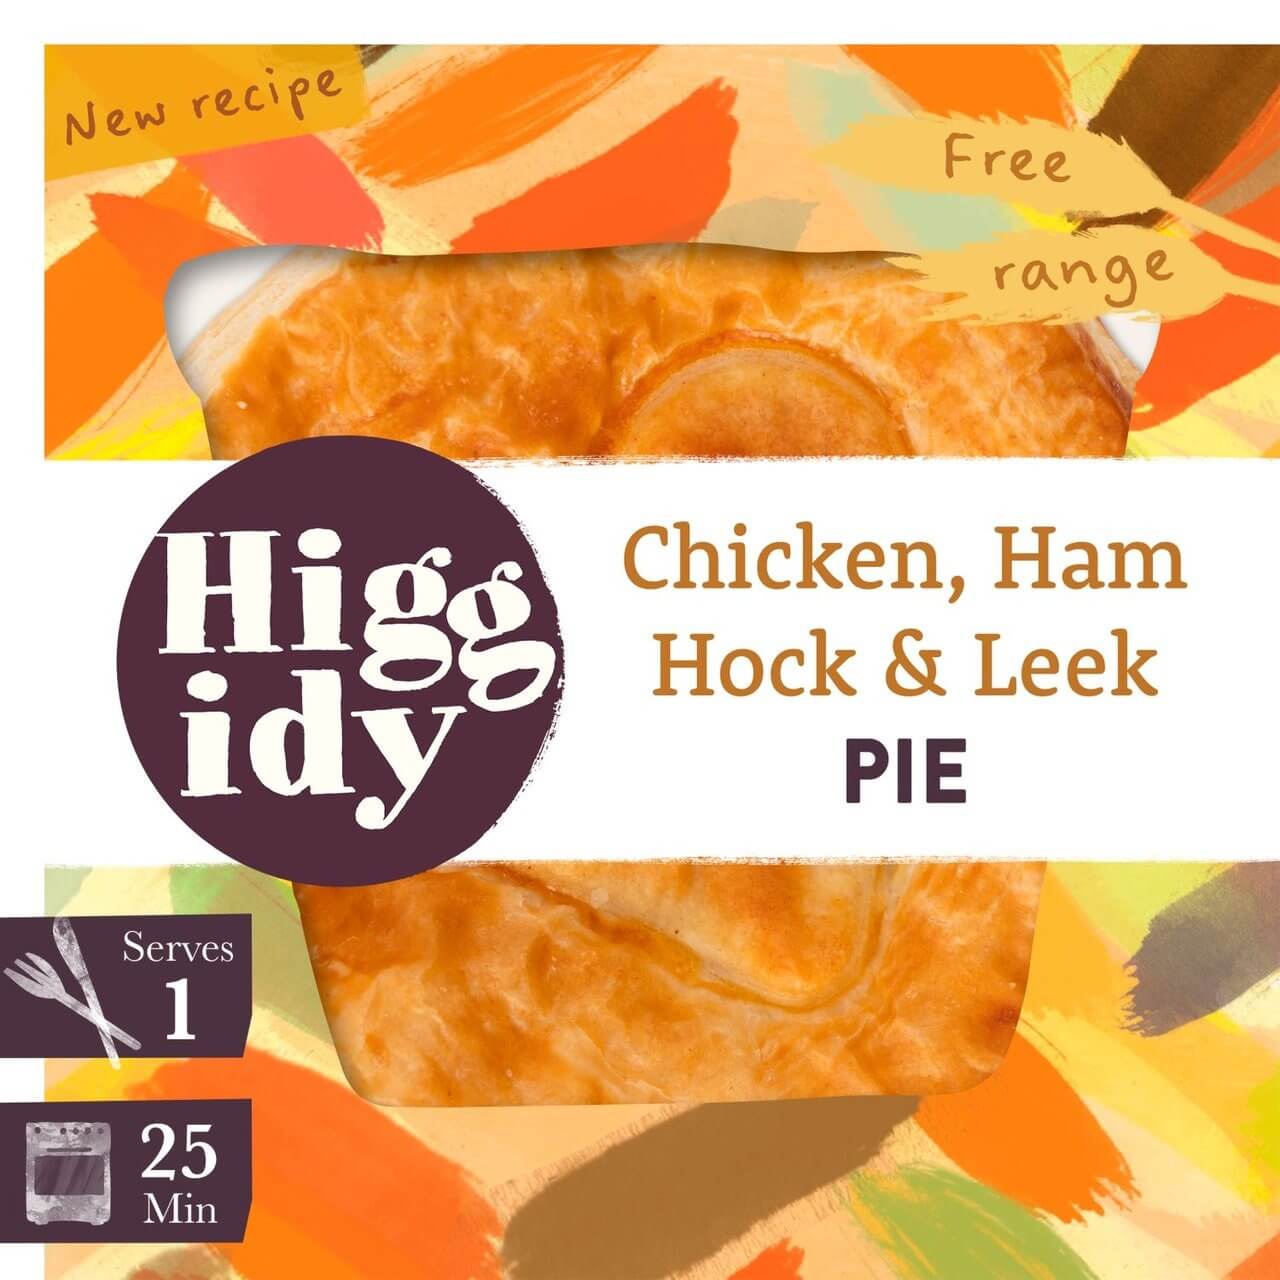 A glimpse of diverse products by Higgidy, supporting the UK economy on YouK.